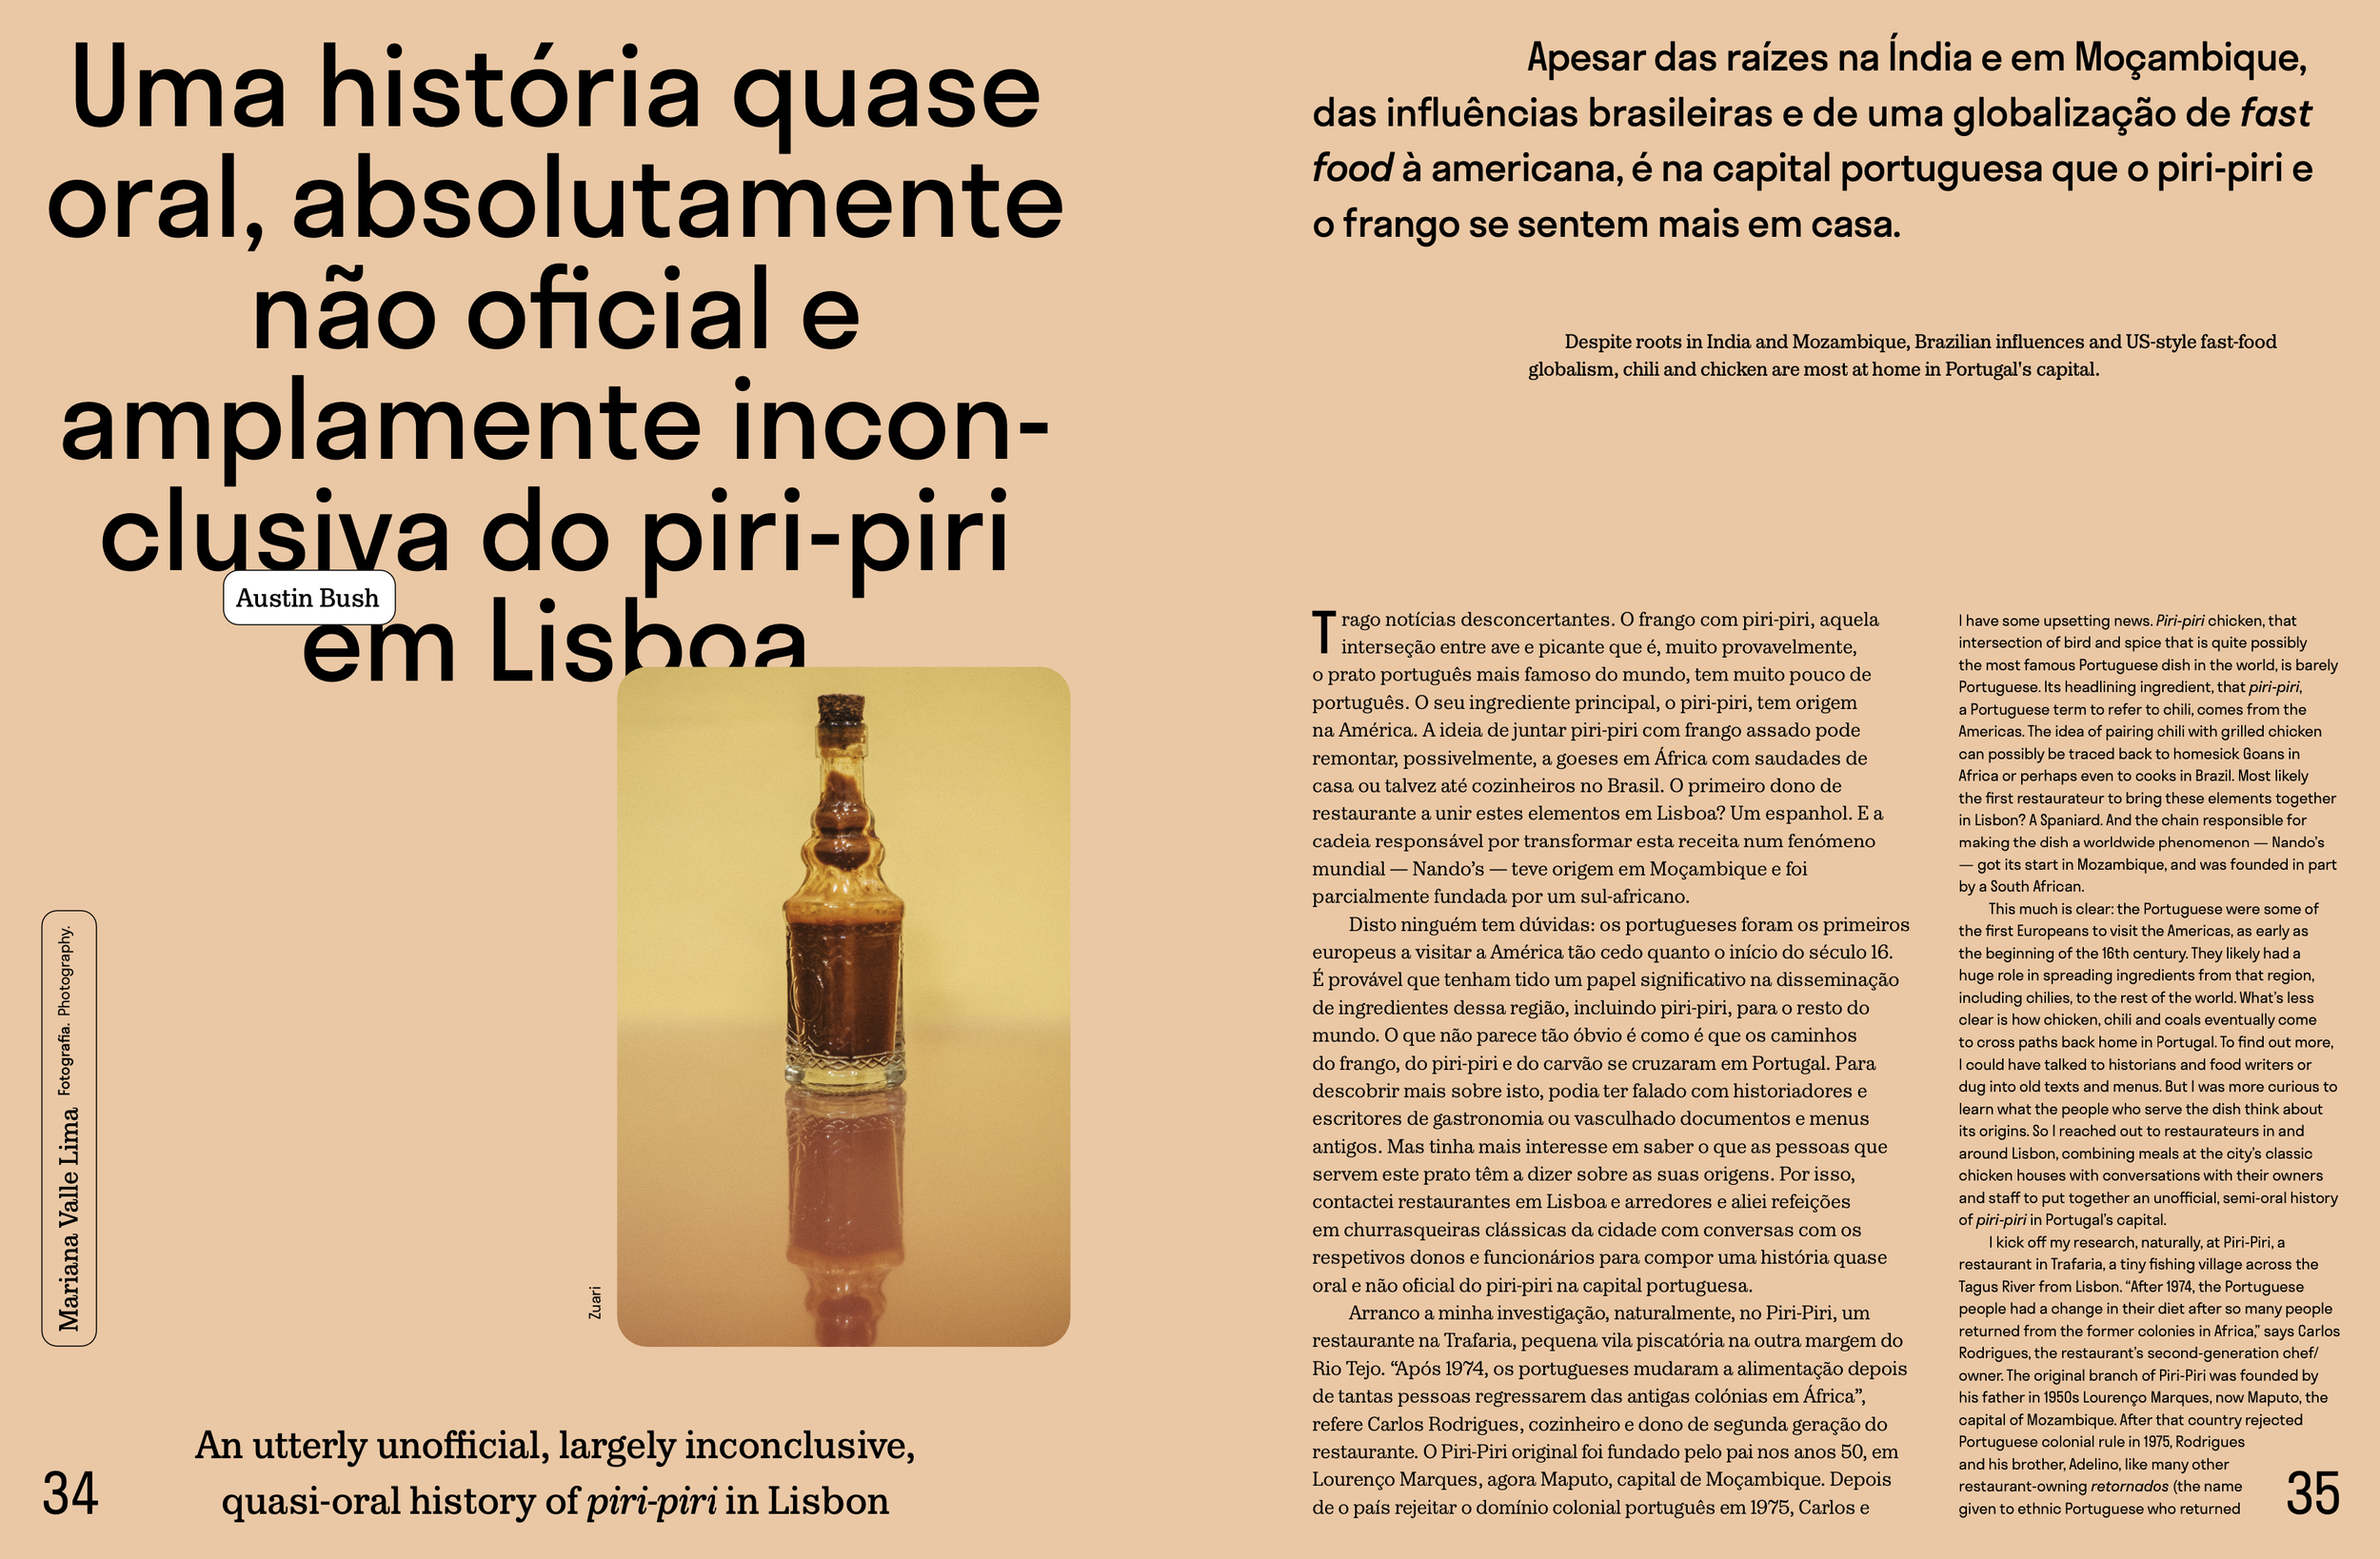  Text: “An utterly unofficial, largely inconclusive, quasi-oral history of piri-piri in Lisbon, FARTA 